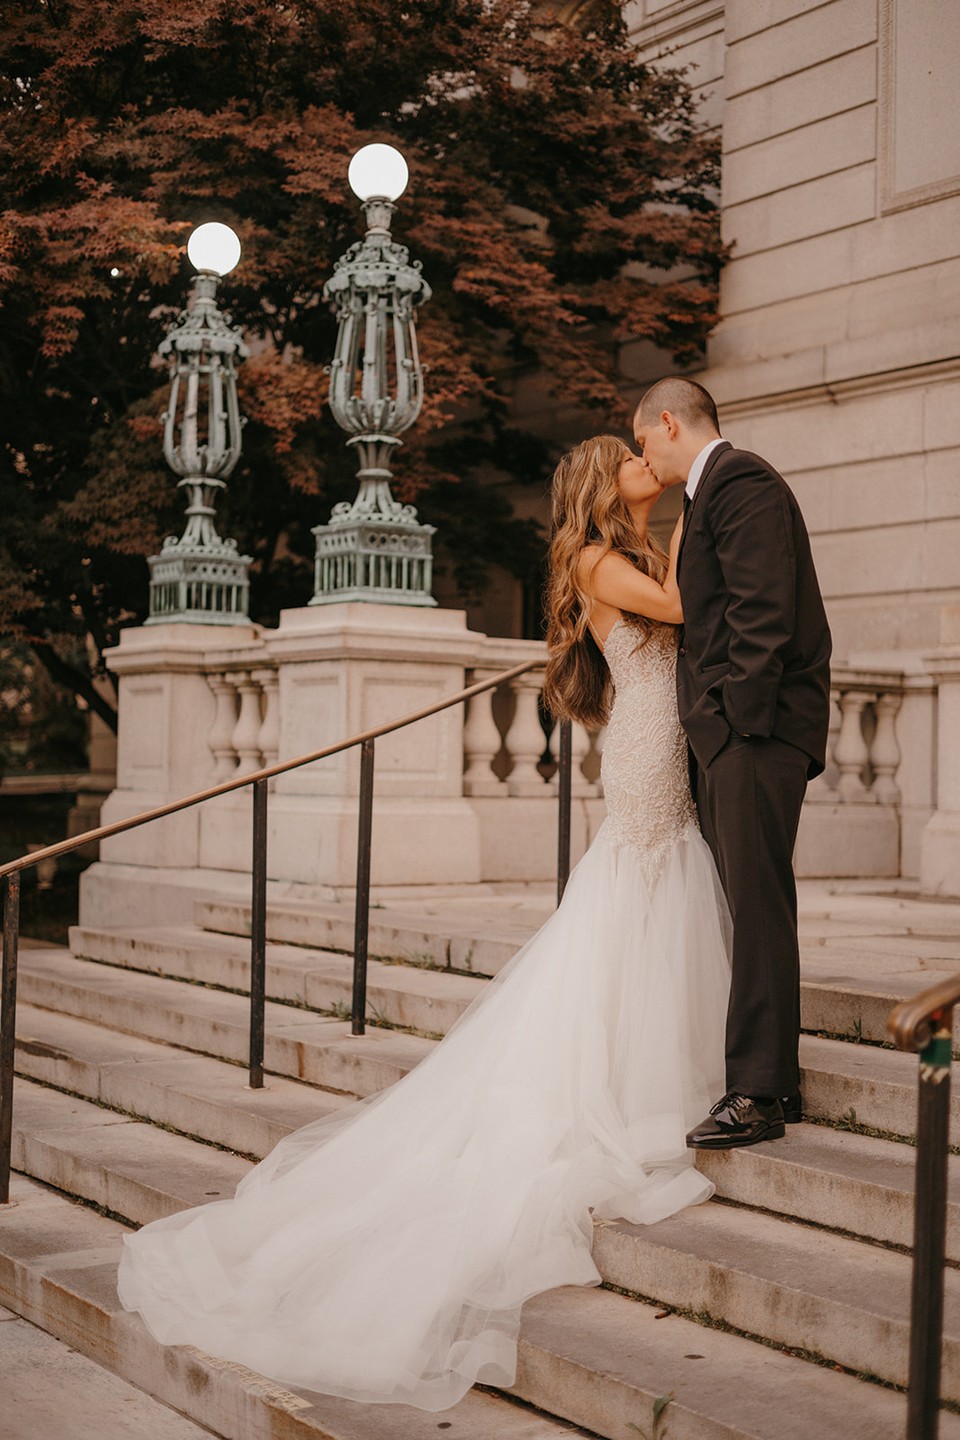 A bride in a mermaid style beaded wedding dress is kissing a groom in a black tuxedo on the stairs